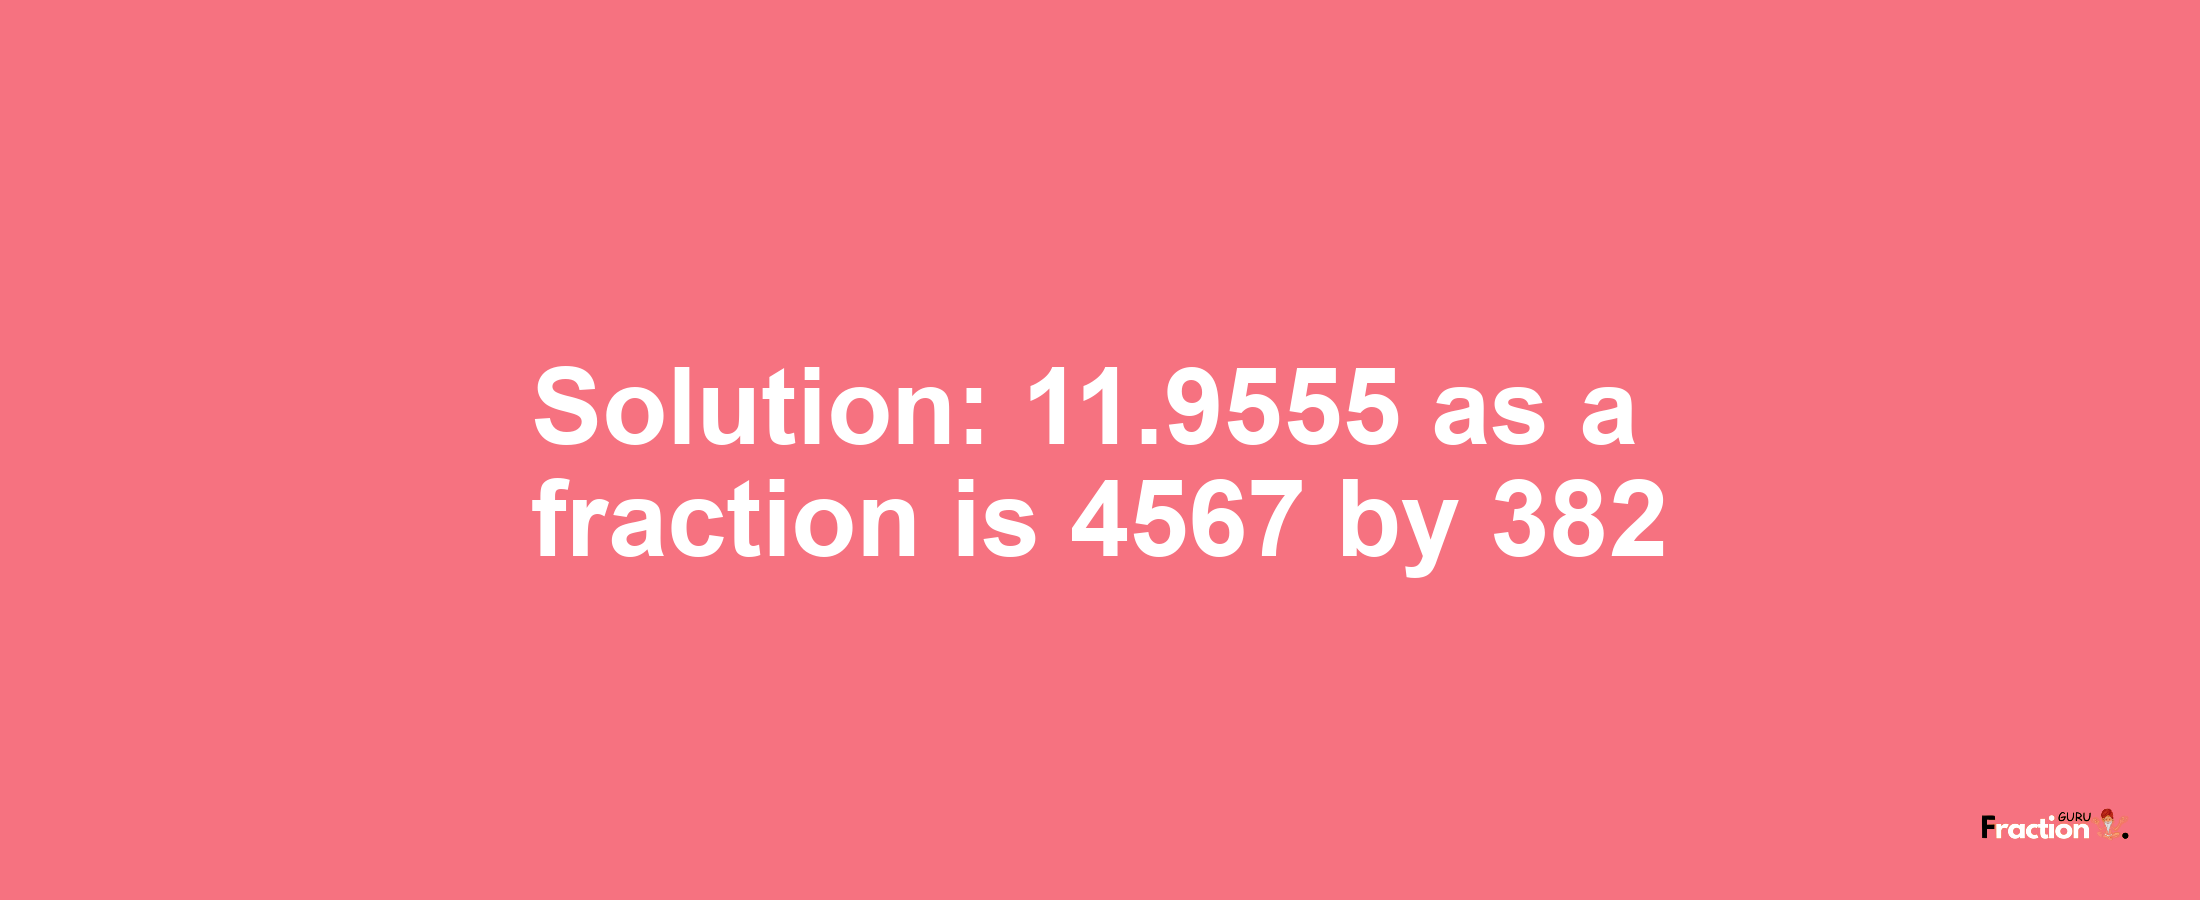 Solution:11.9555 as a fraction is 4567/382